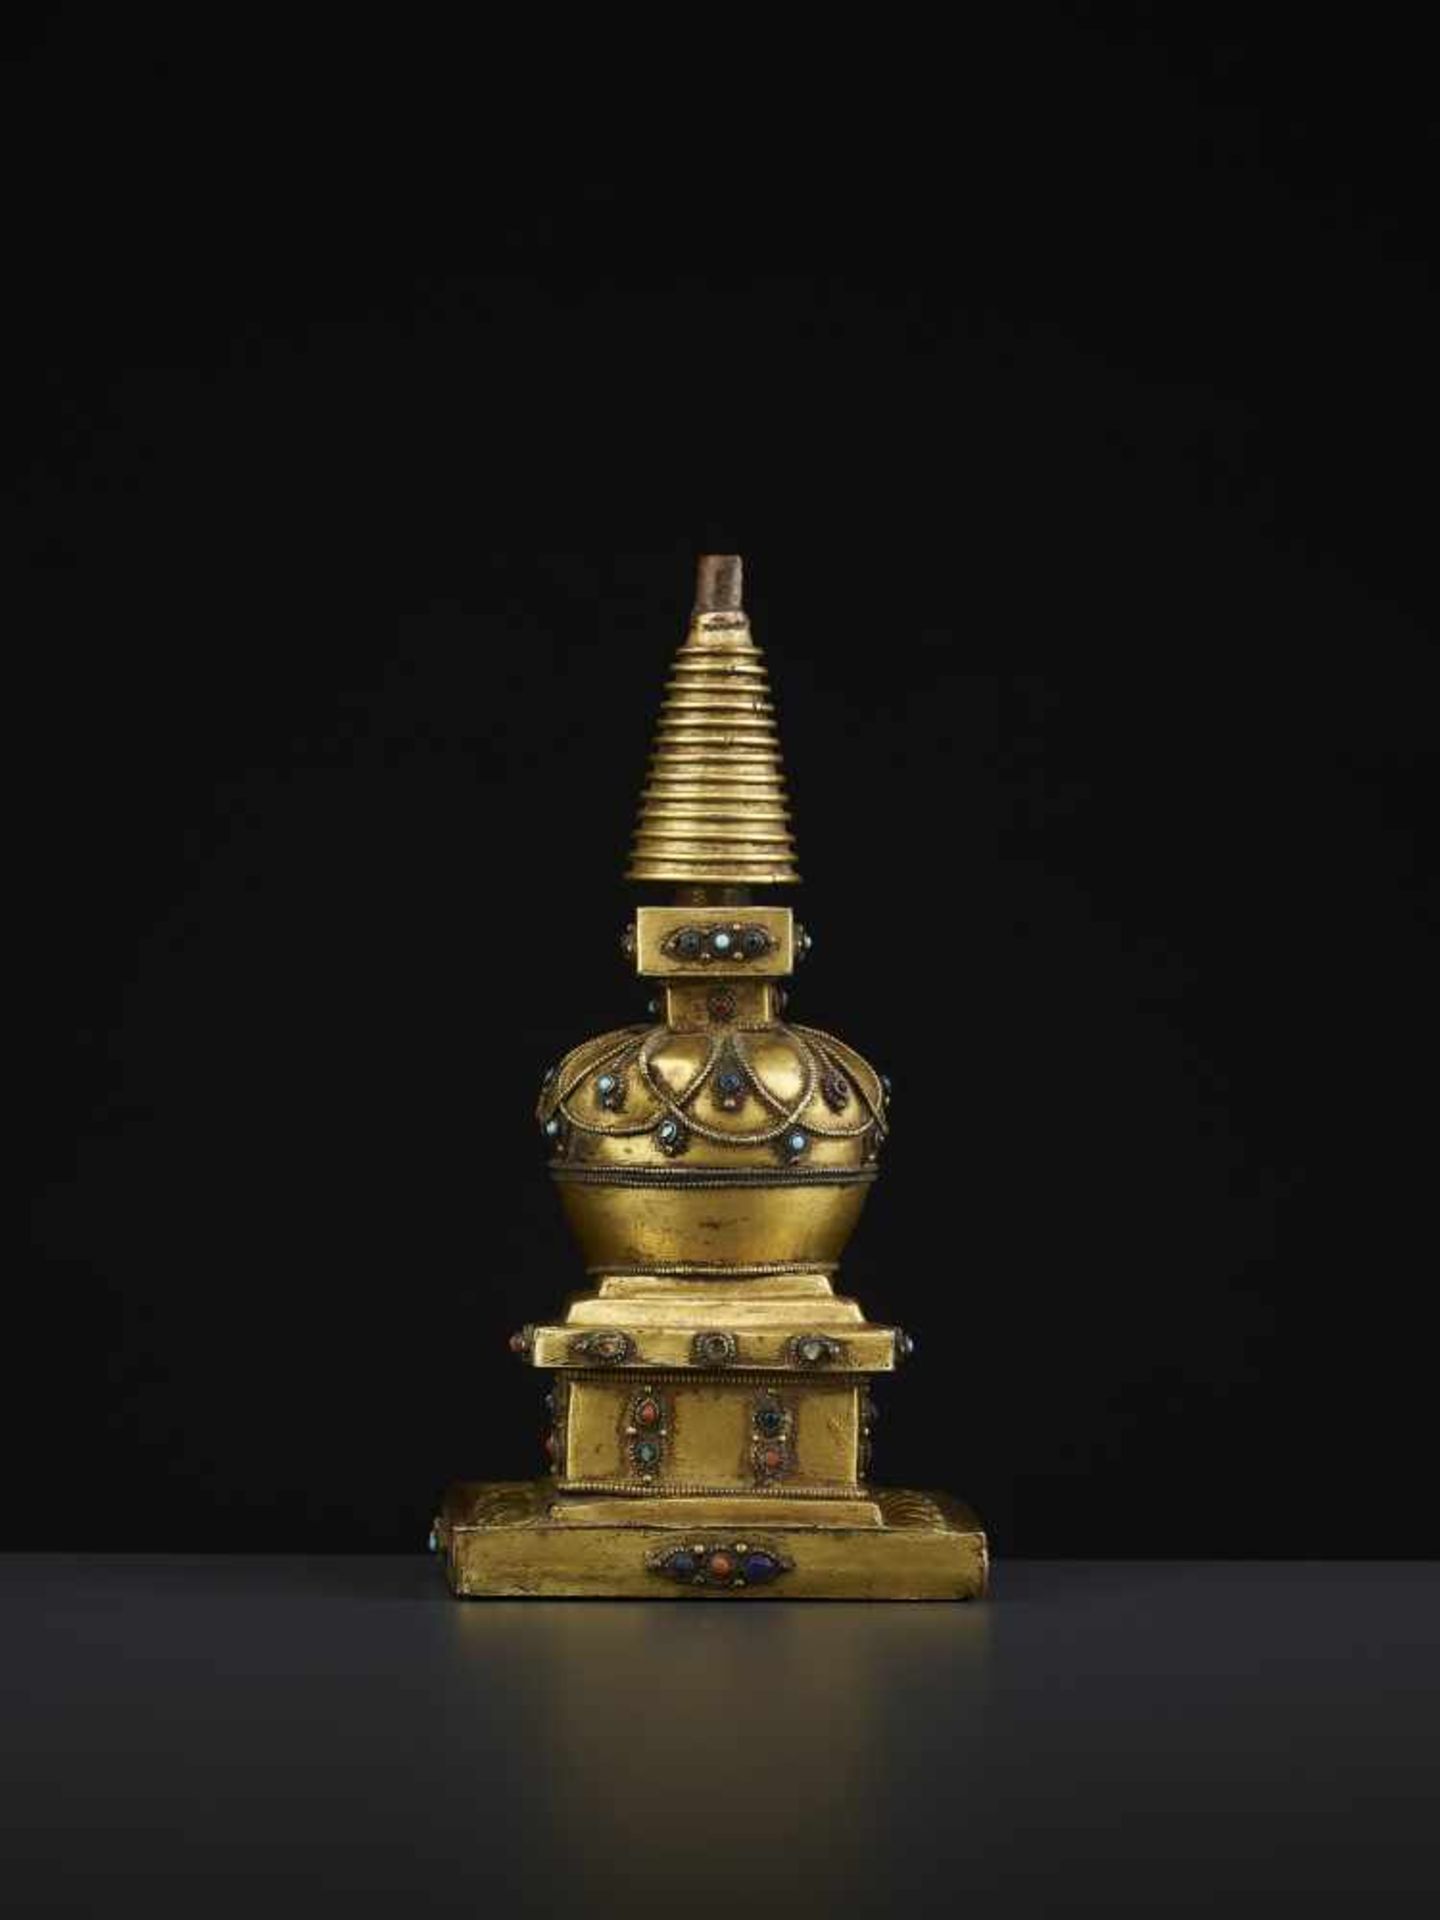 A REPOUSSE STUPA 18TH CENTURYTibet, 18TH to earlier 19TH century. A fire-gilt copper model of a - Image 6 of 11